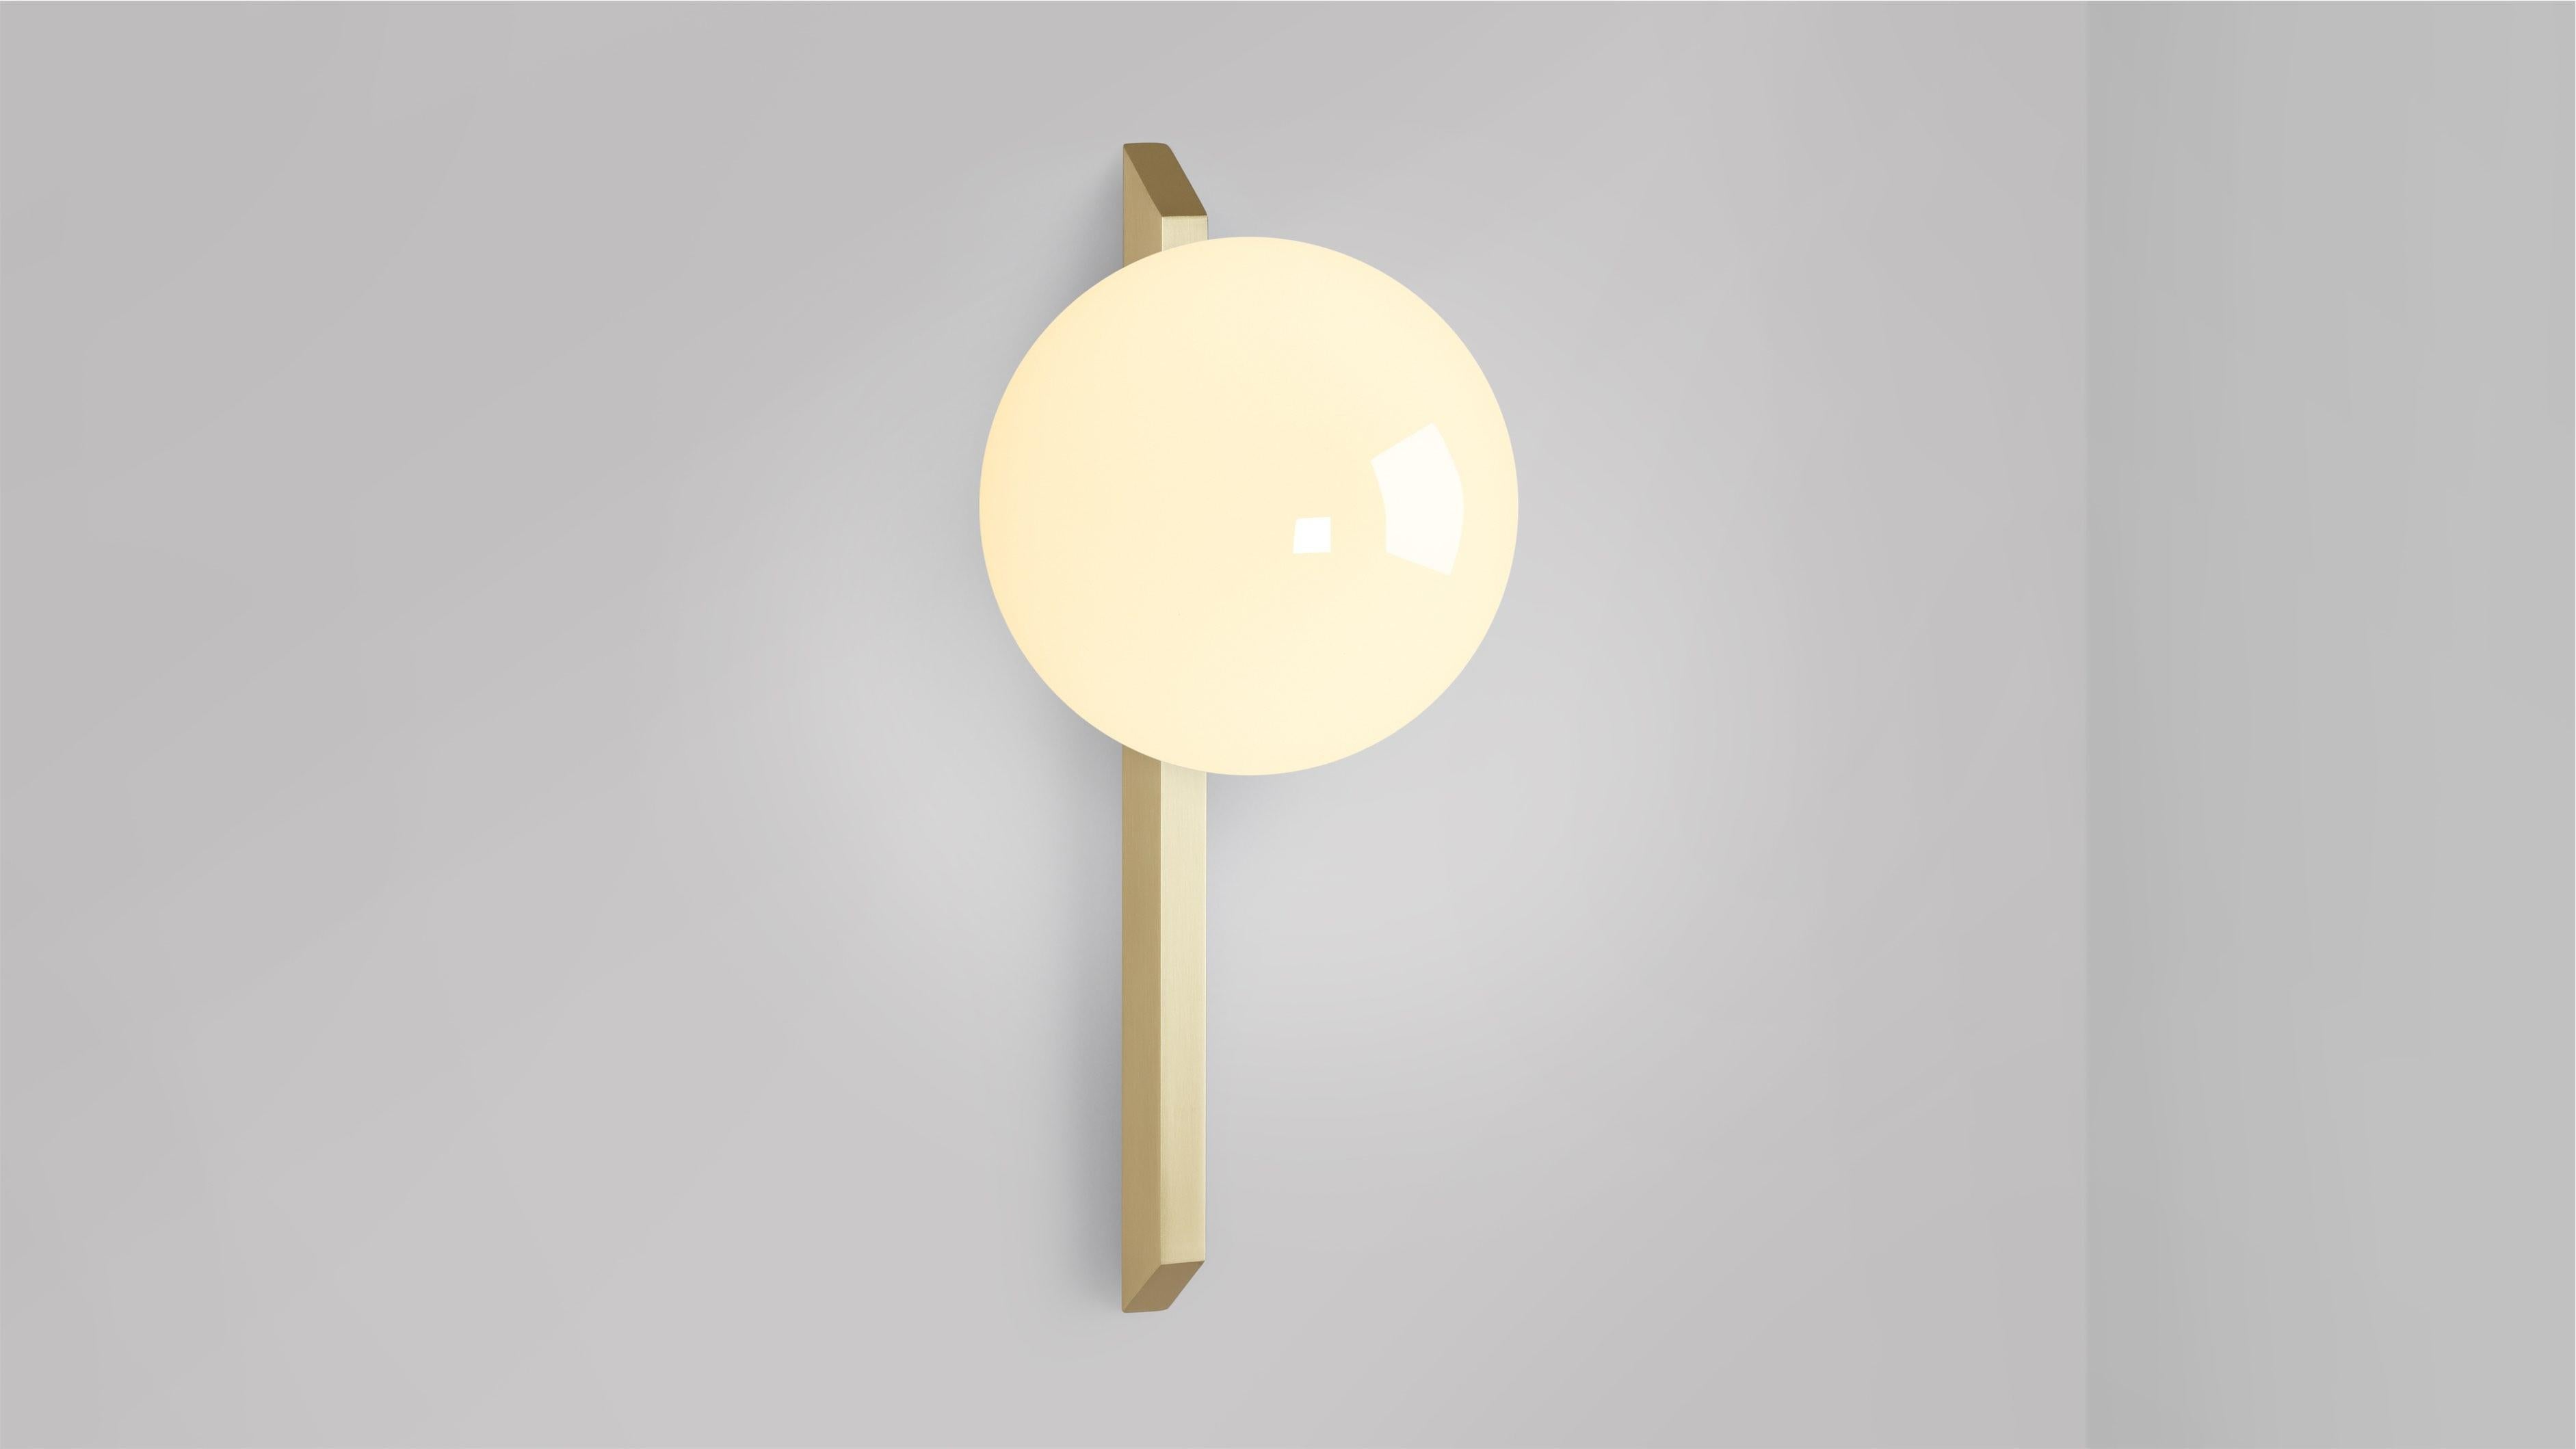 Tall Gaia wall lamp by CTO Lighting
Materials: Satin brass with shiny opal glass.
Dimensions: D 18.3 x W 15 x H 35 cm
Available in bronze or satin brass and in hand shaped smoke glass, matte opal glass, shiny opal glass, or tinted glass.

An elegant